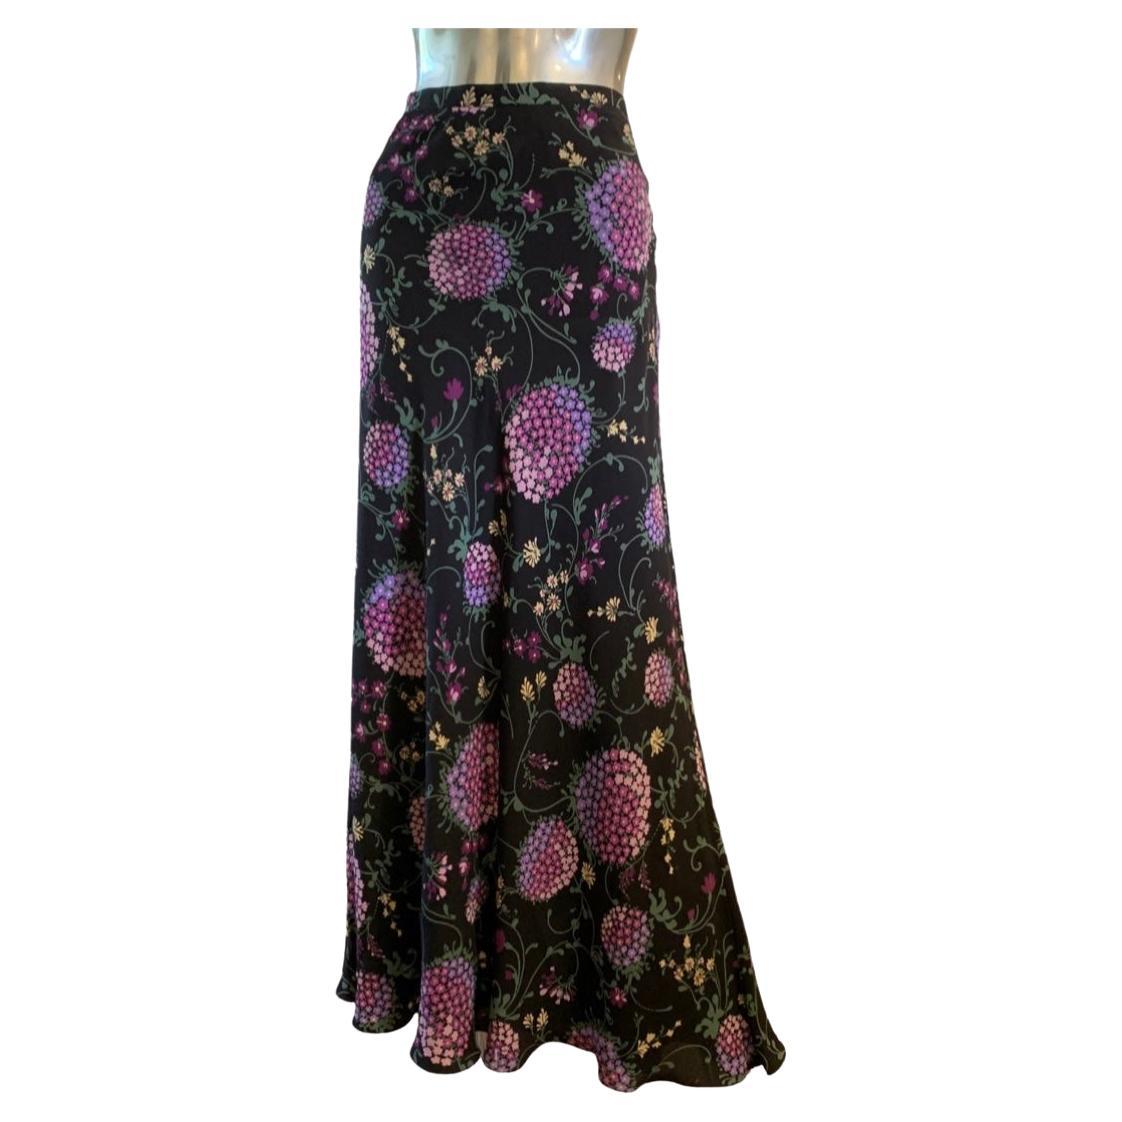 Moschino Cheap & Chic Silk Hydrangea Floral Maxi Skirt, Italy Size 8 For Sale